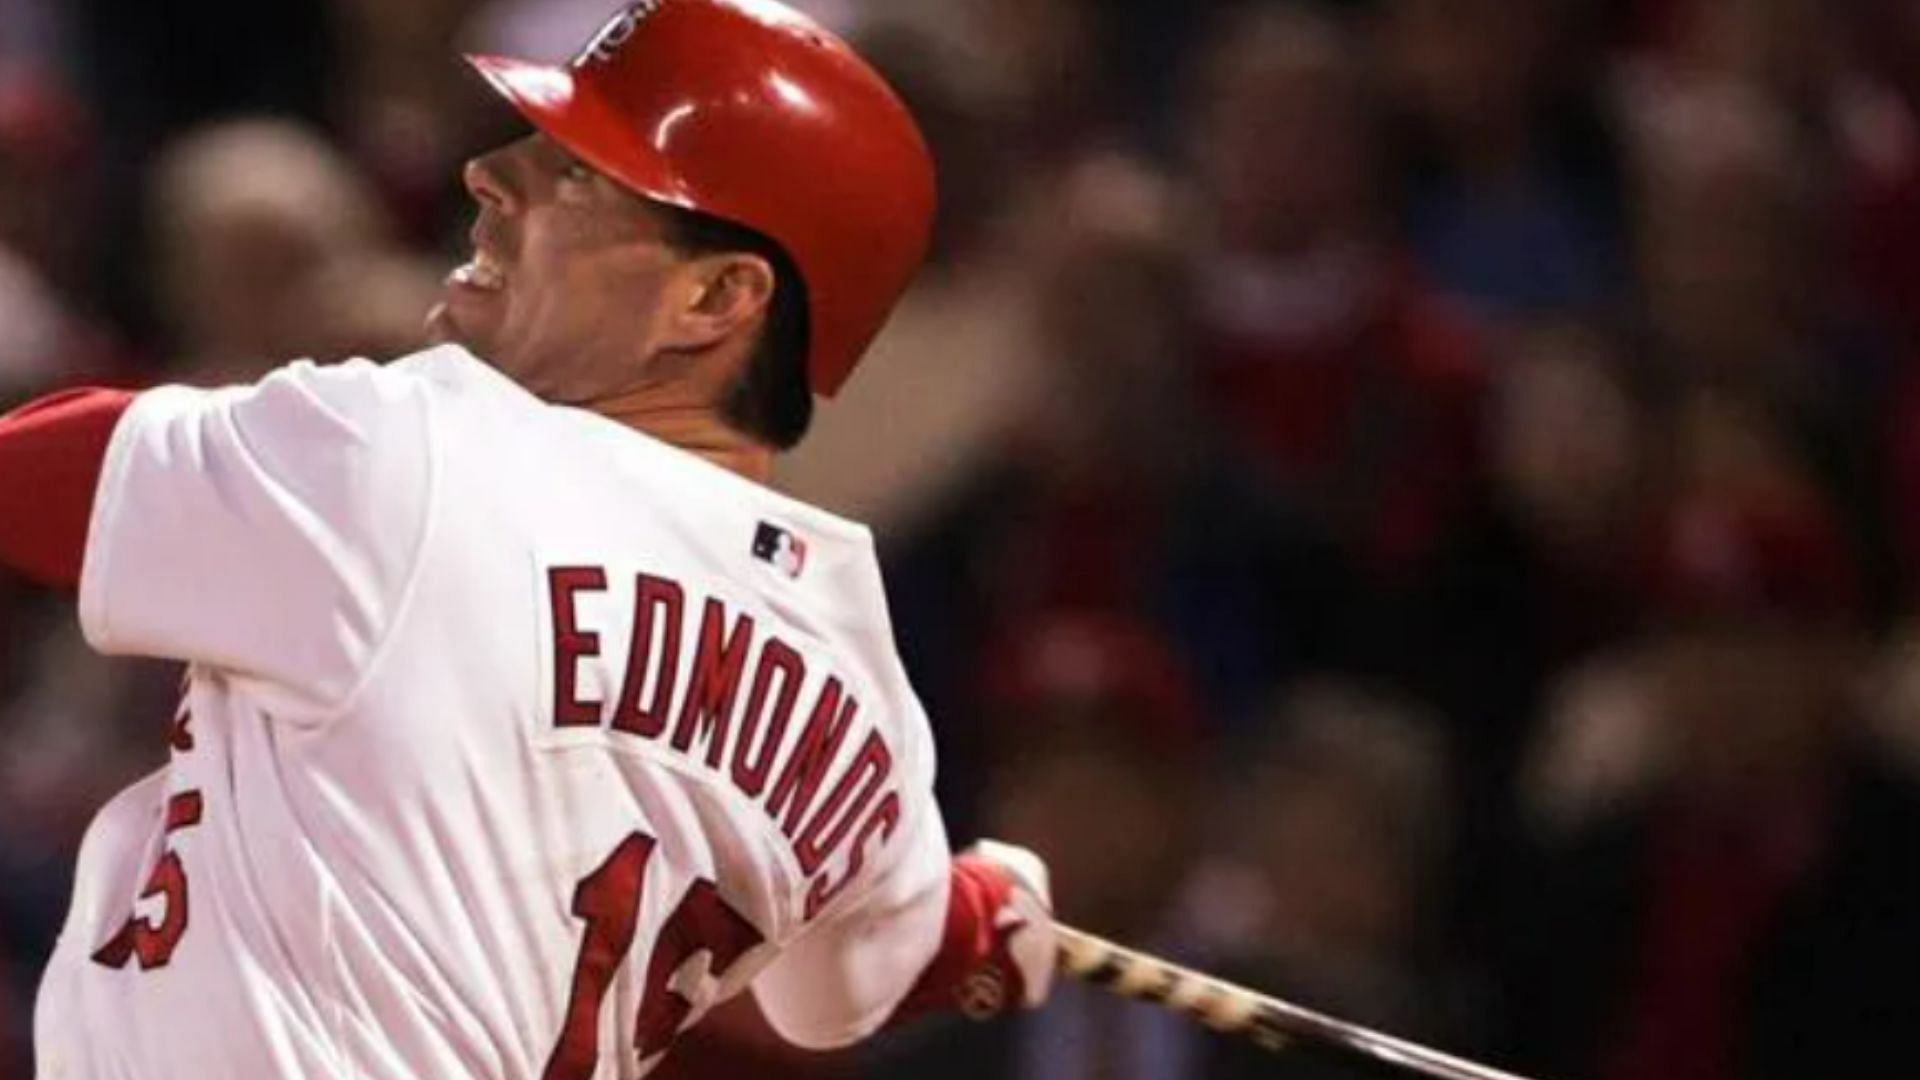 Former MLB player Jim Edmonds sparks controversy with comments on